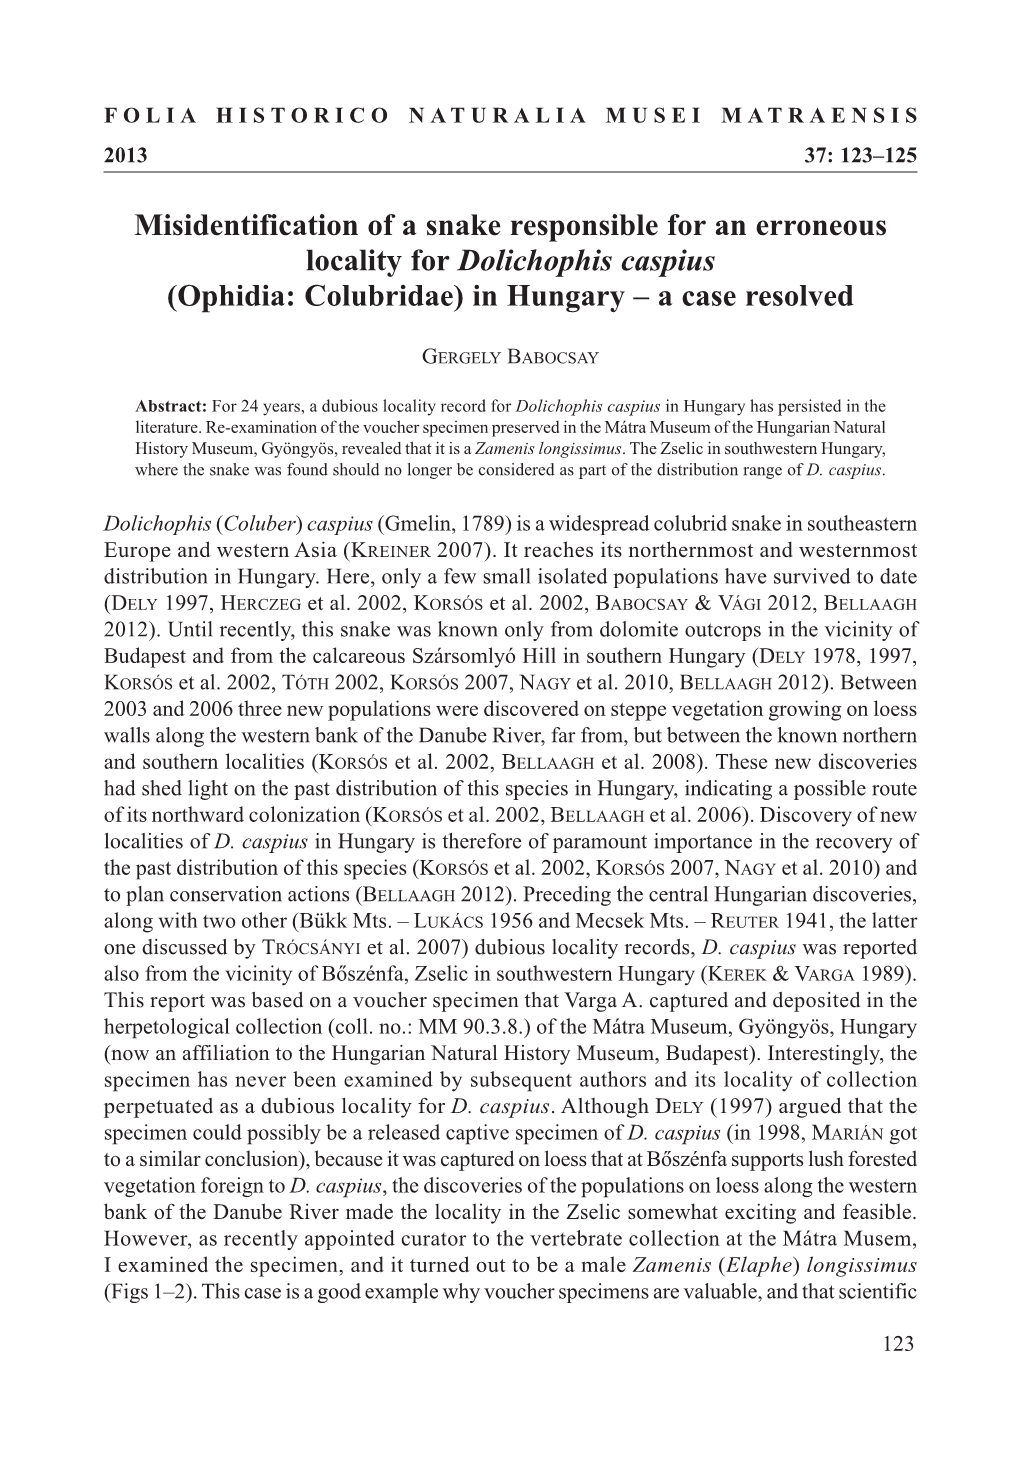 (Ophidia: Colubridae) in Hungary – a Case Resolved